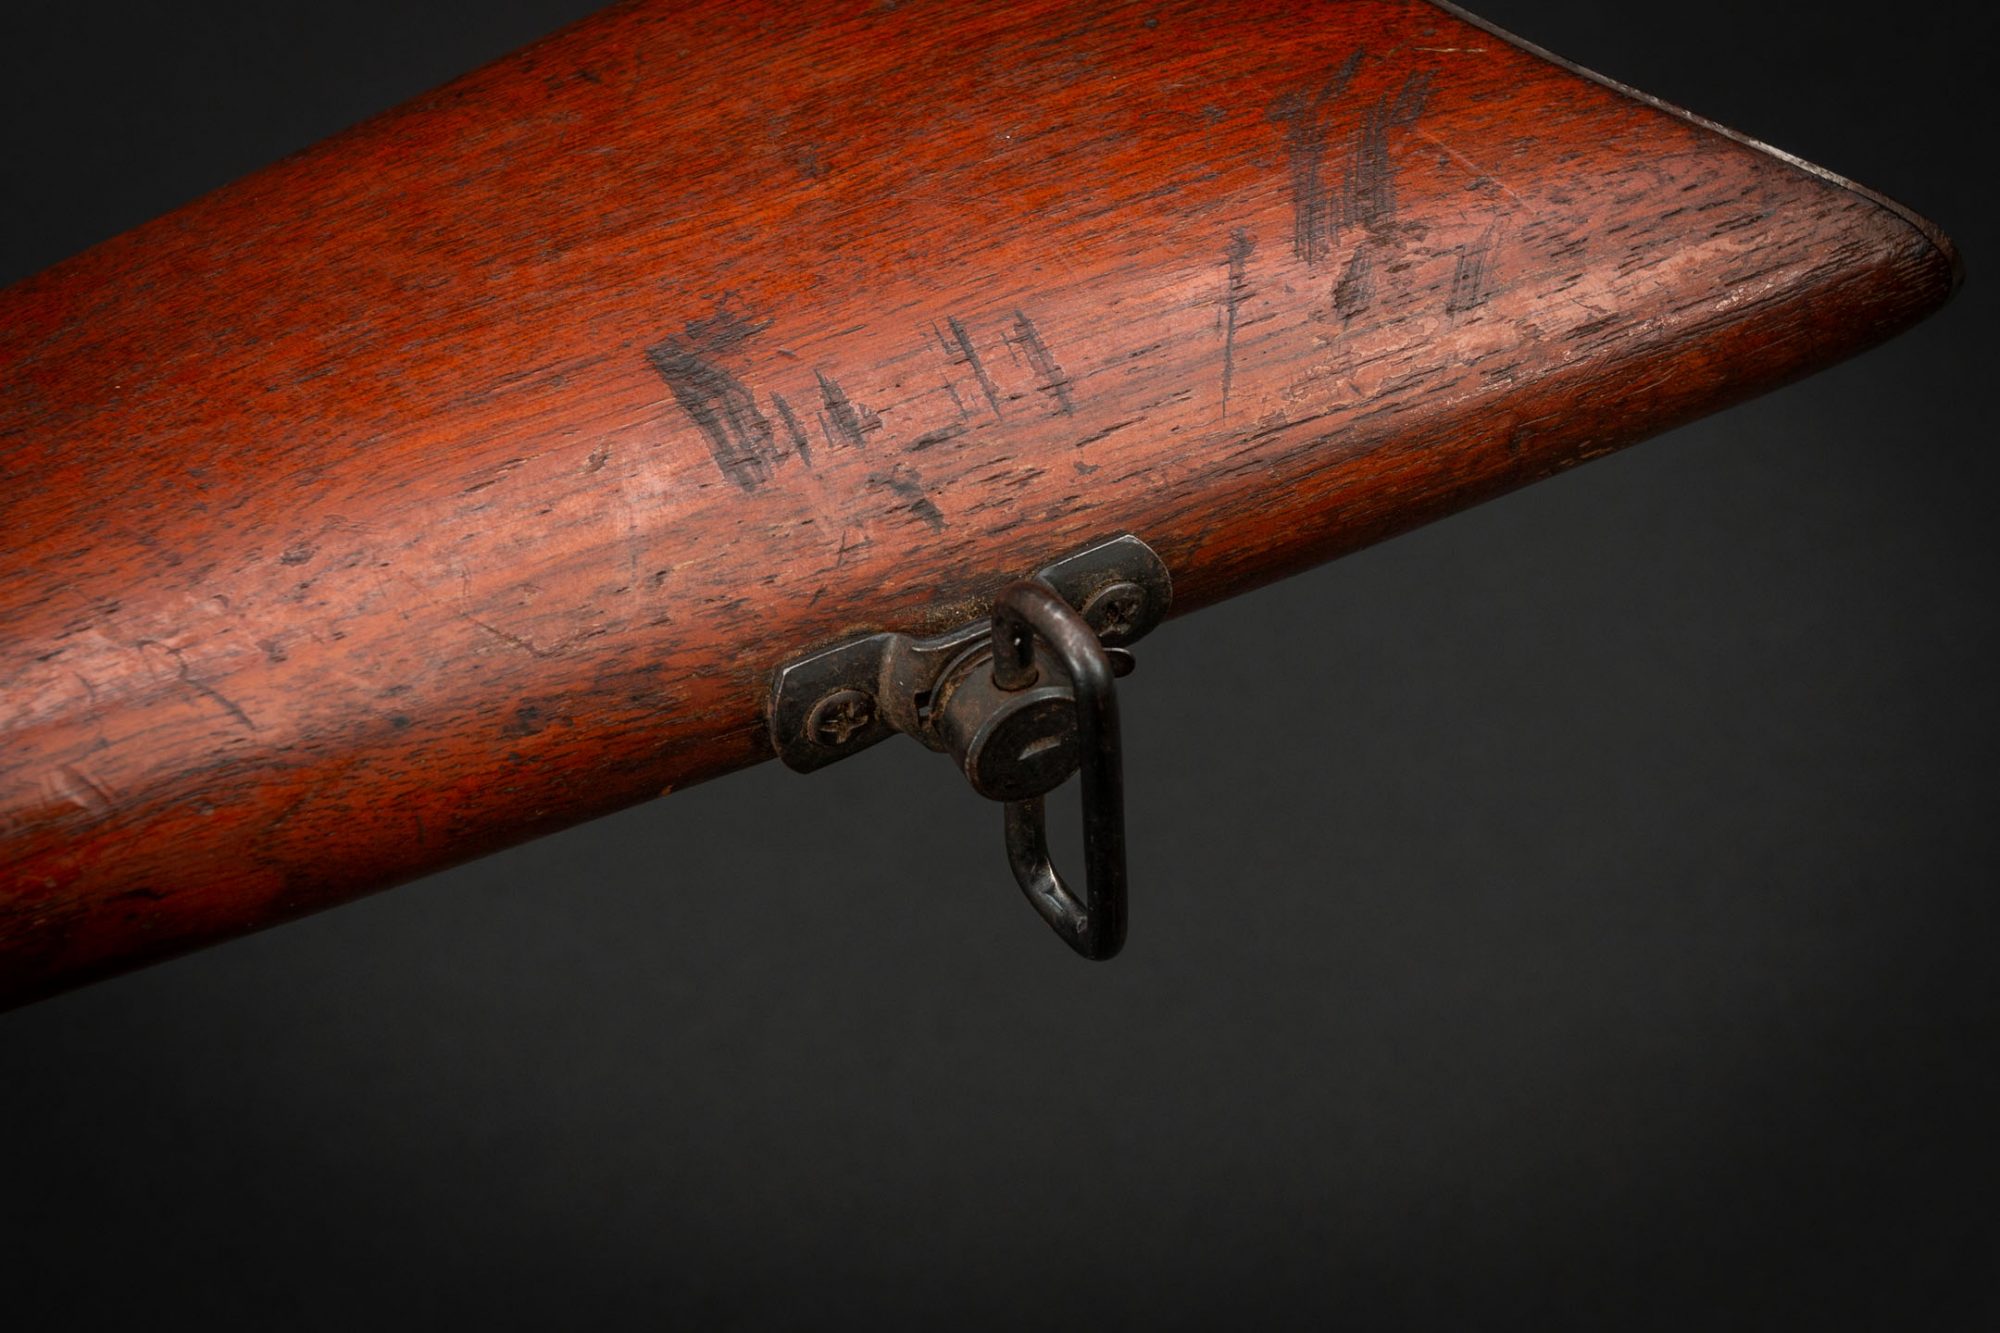 Winchester Model 1894 in .30-30 Winchester, for sale by Turnbull Restoration Co. of Bloomfield, NY